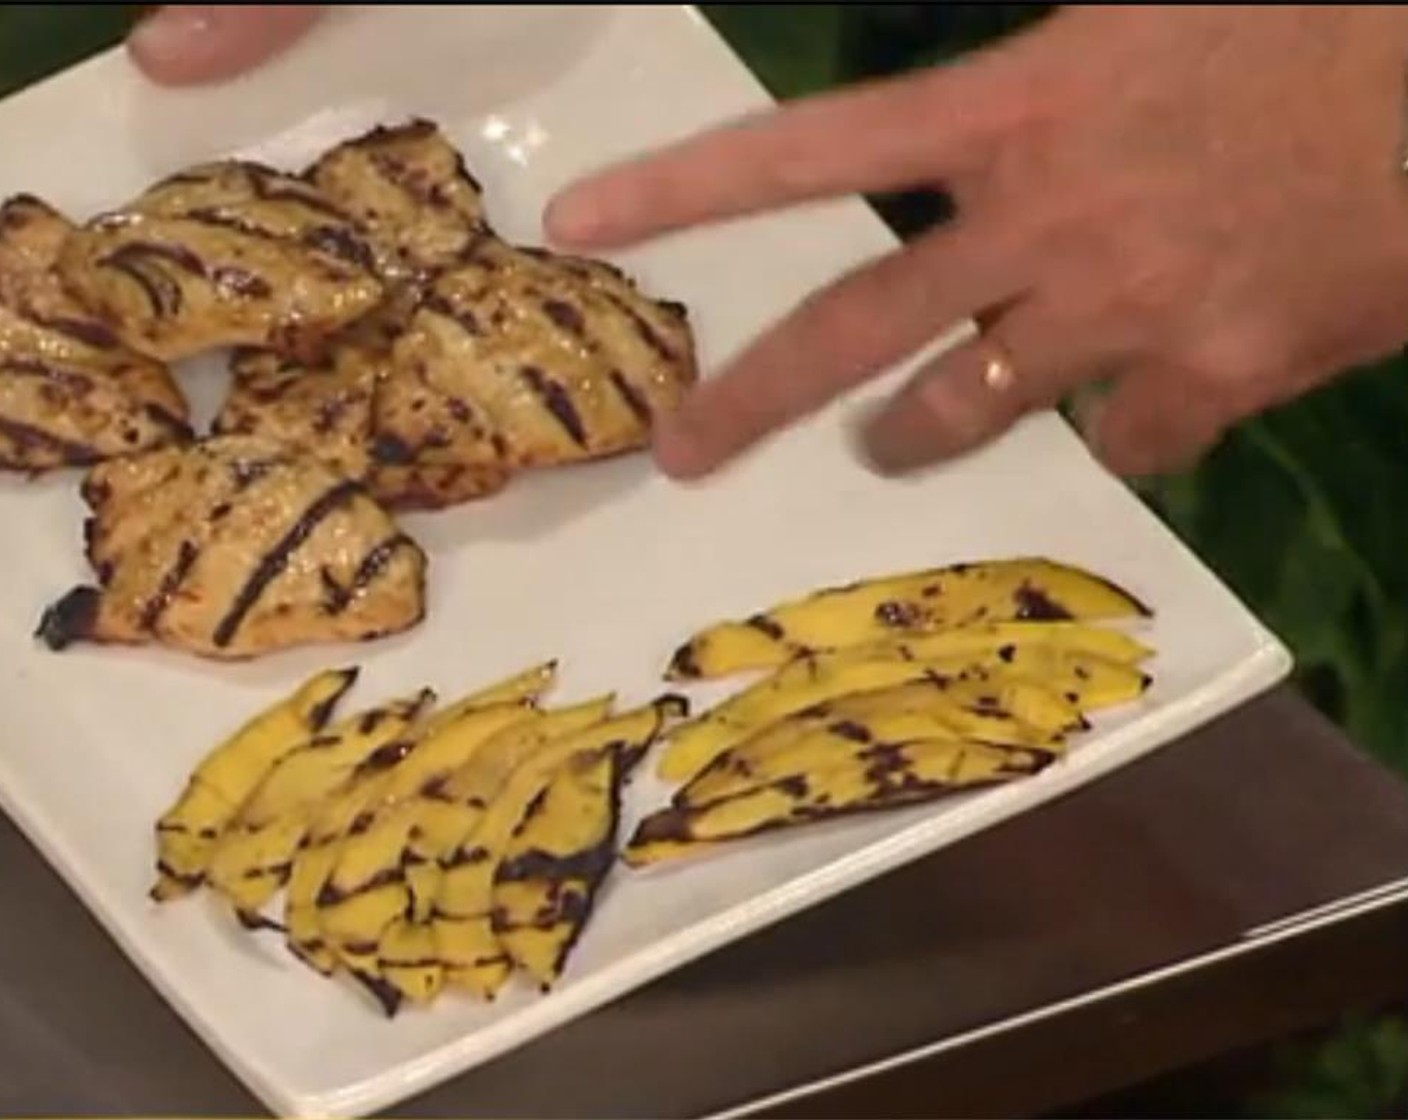 step 6 Spread the mango slices in an even layer on the preheated grill. Let the fruit char slightly, then flip and let char on the other side, about 3-4 minutes total. Remove grilled mango to a plate and set aside.